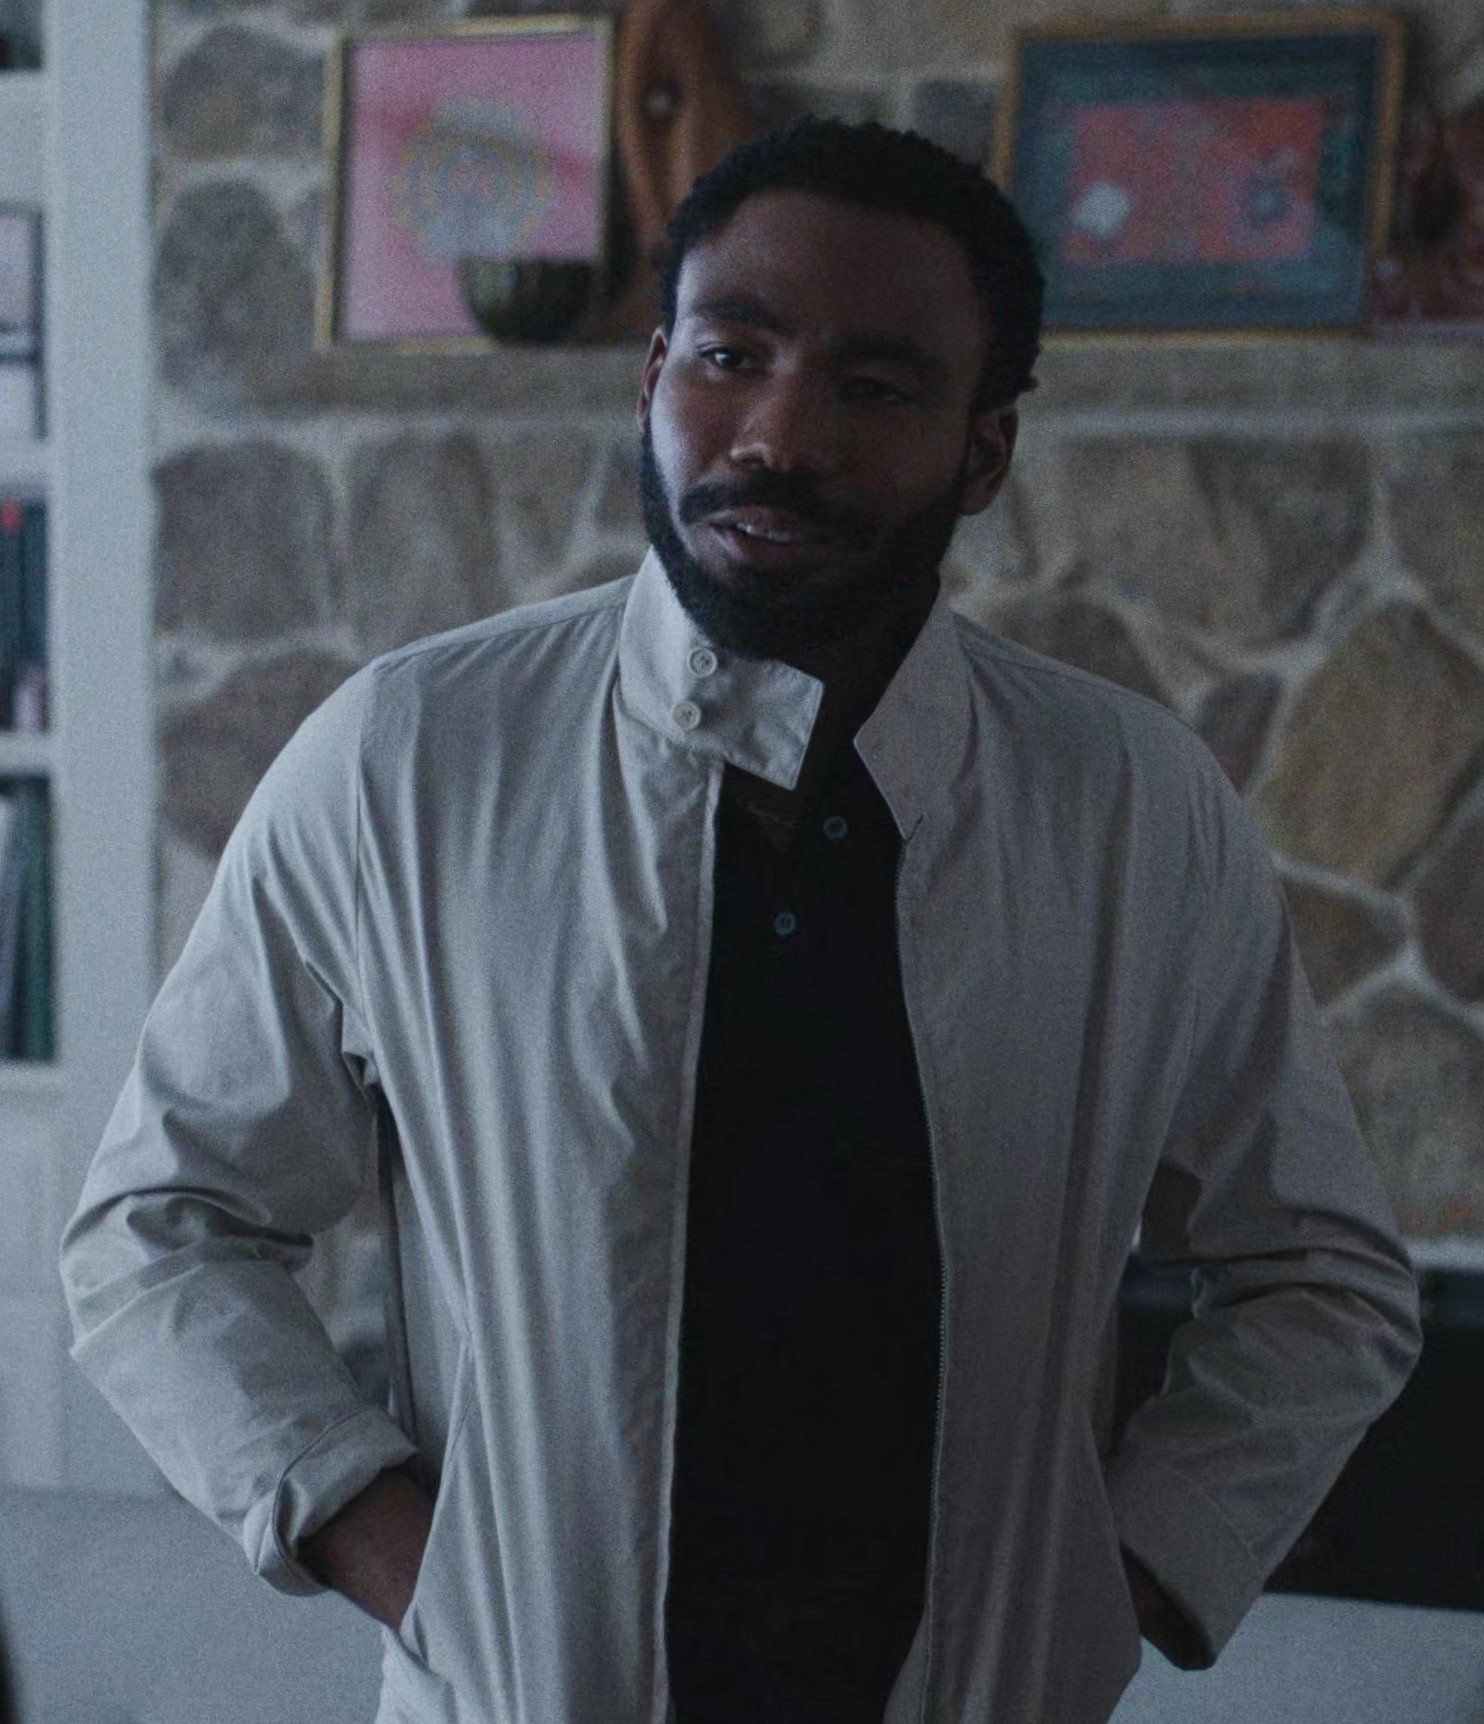 Worn on Mr. & Mrs. Smith TV Show - Light Beige Cotton Jacket of Donald Glover as John Smith